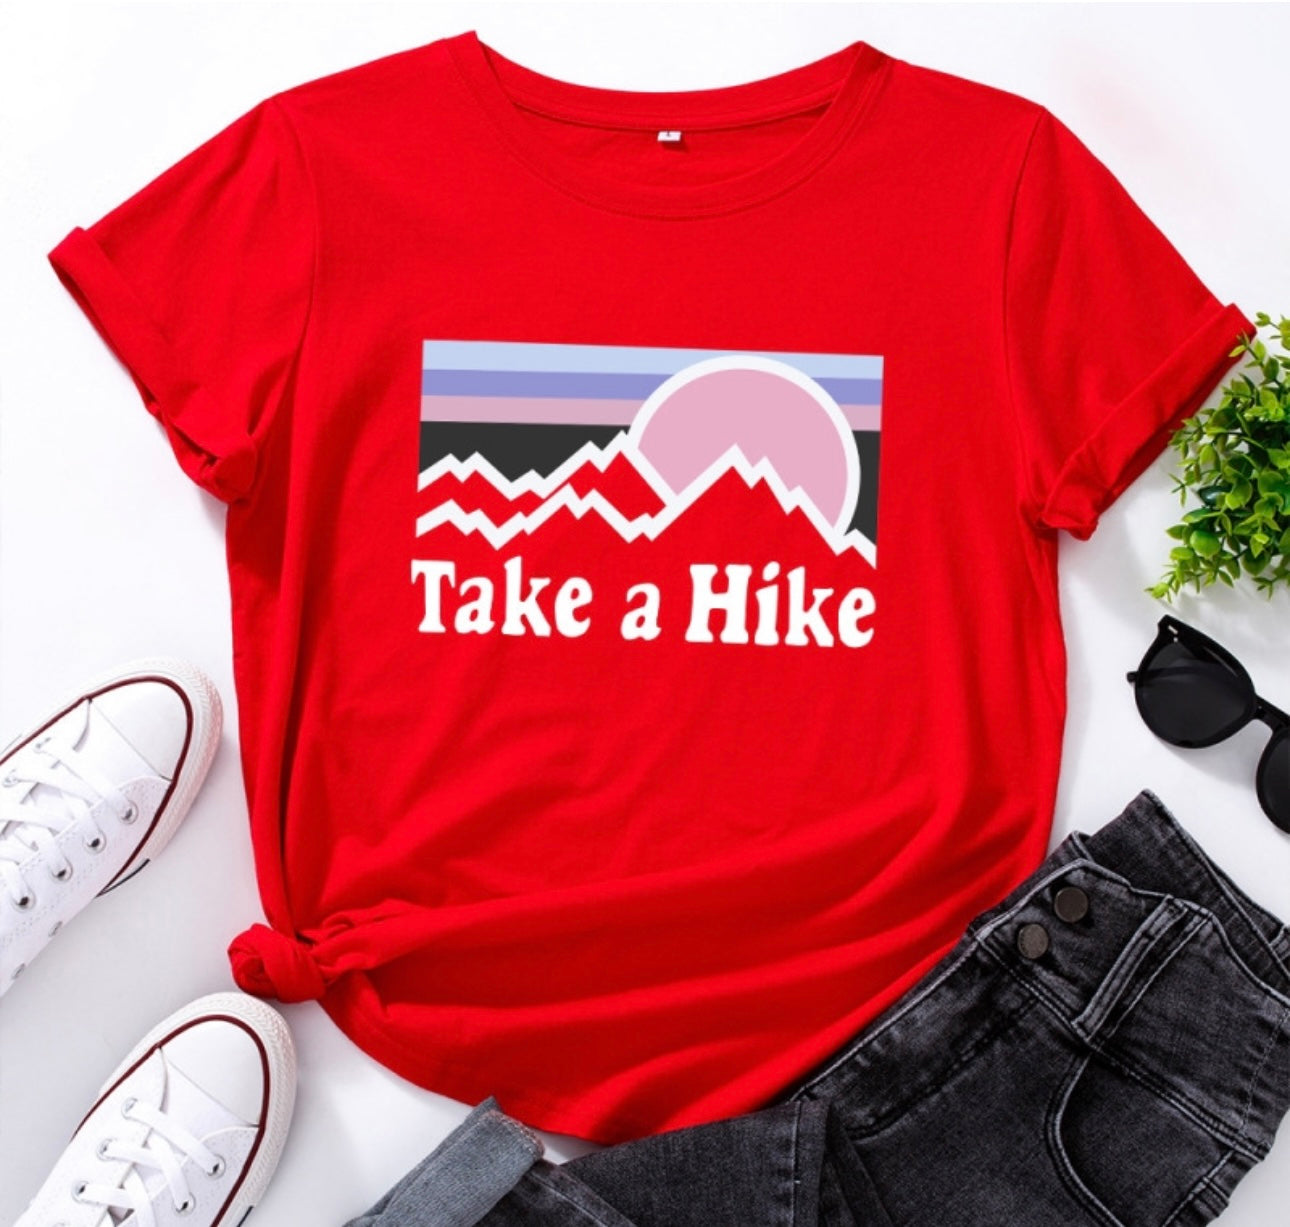 “Take A Hike” (Catchy Graphic Tee)